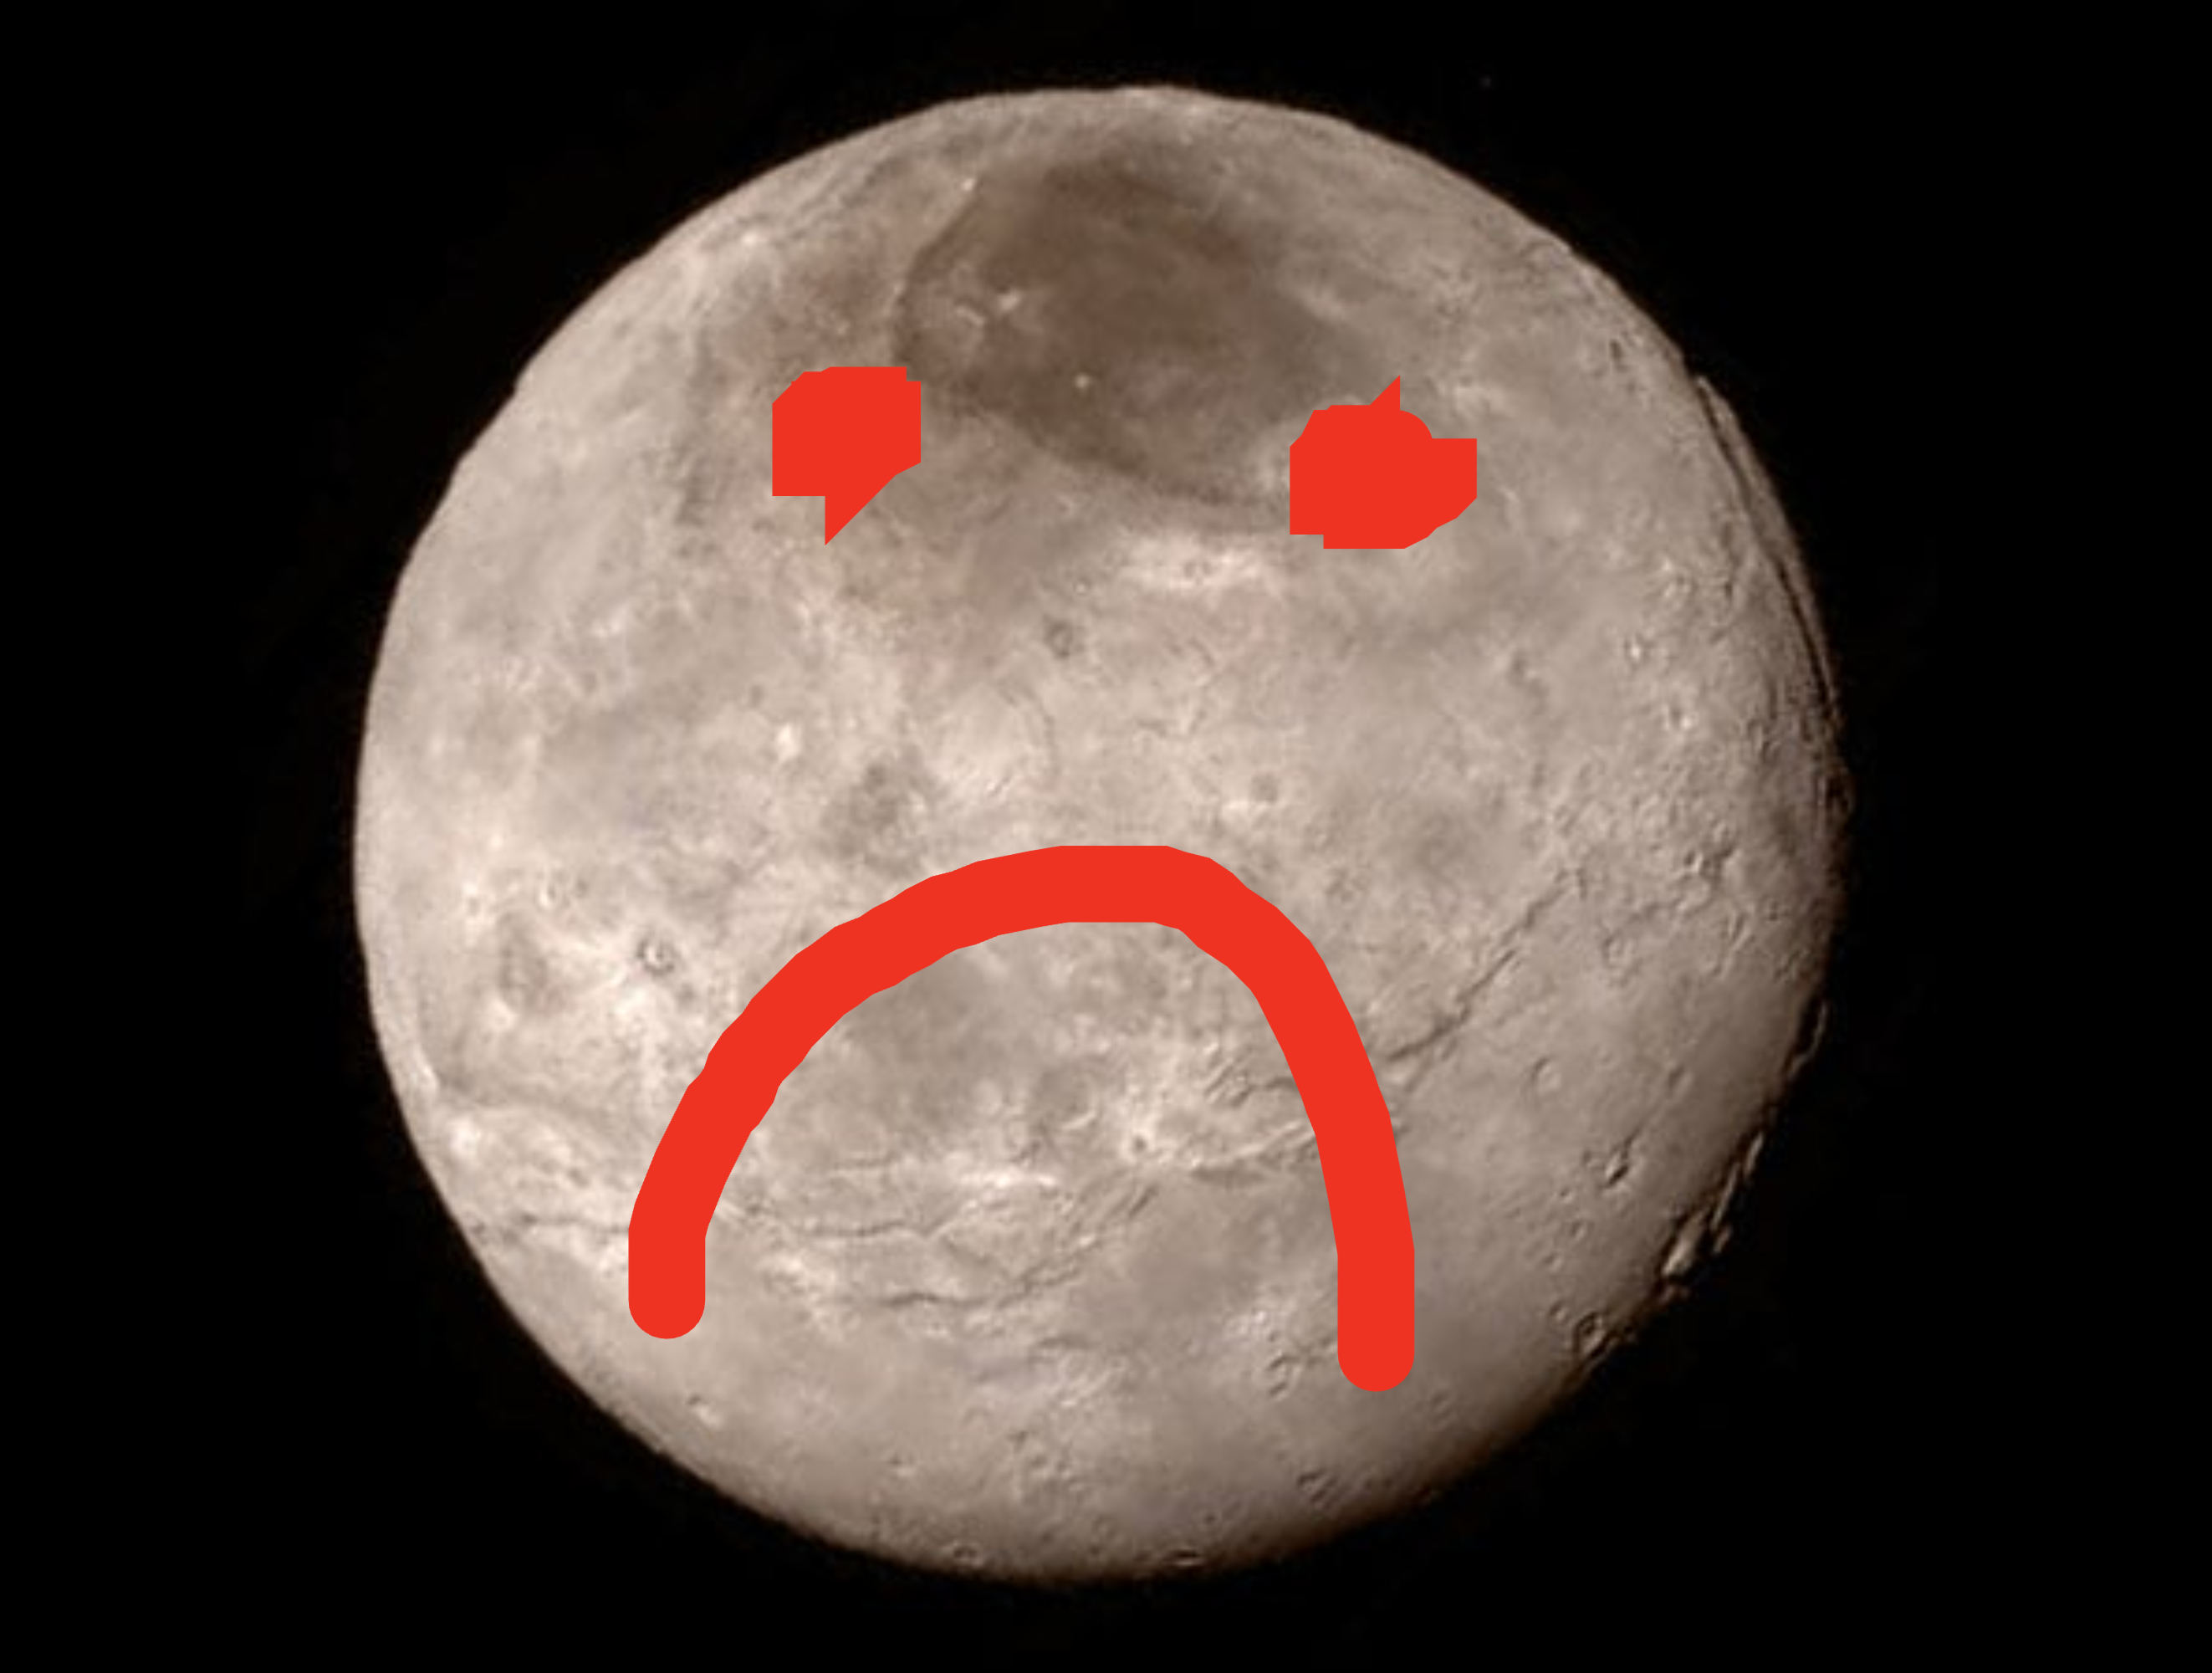 Pluto with a sad face drawn on it